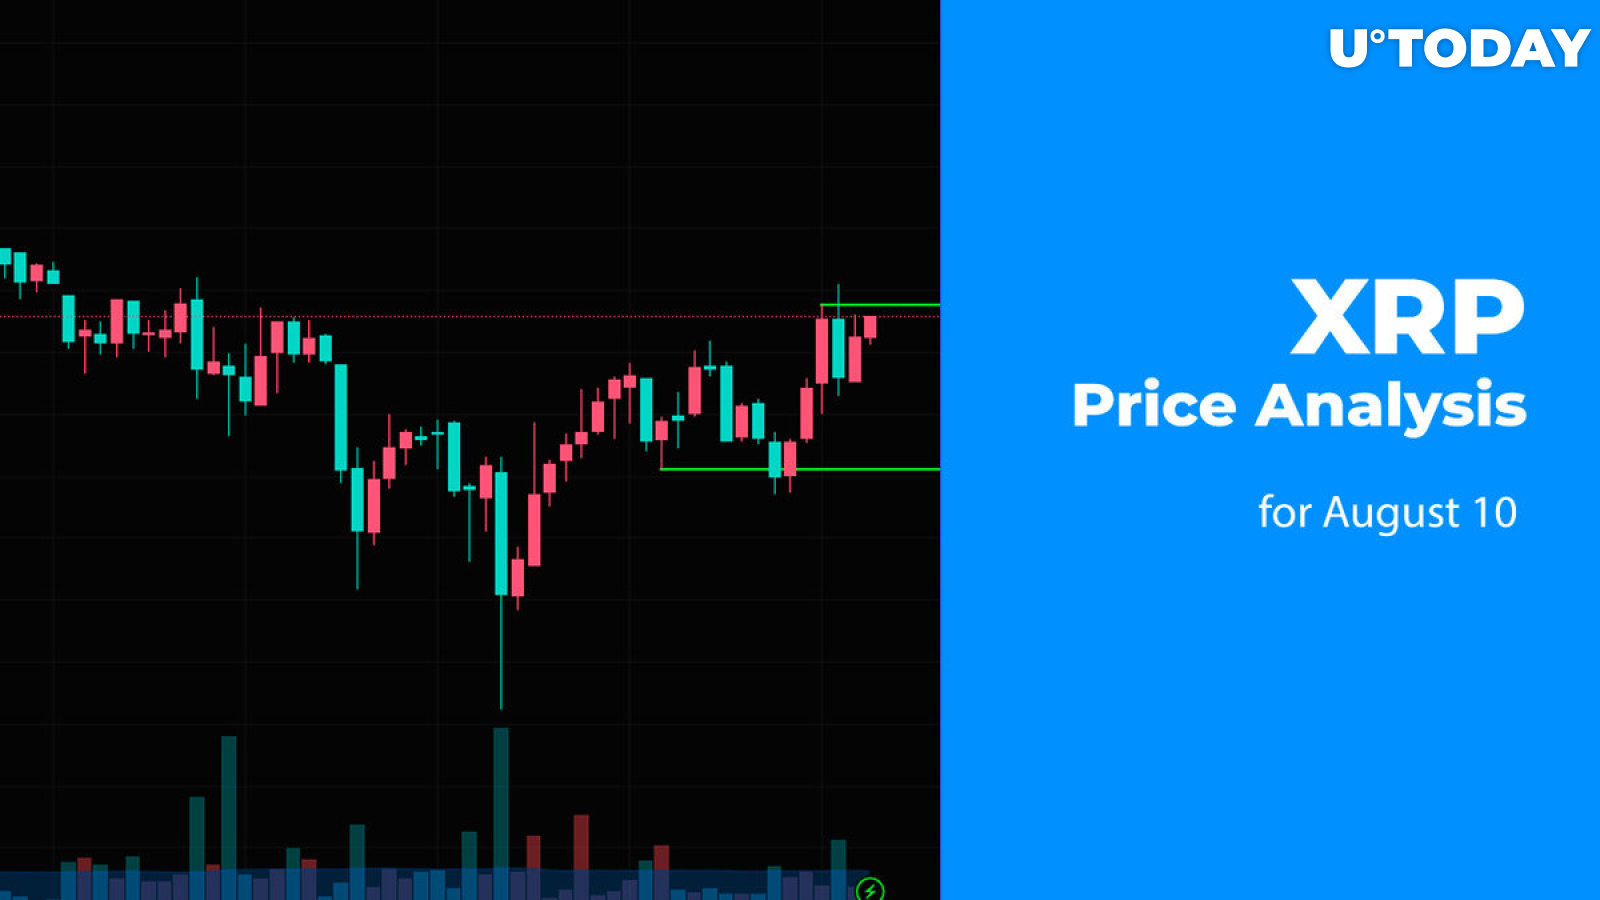 XRP Price Analysis for August 10